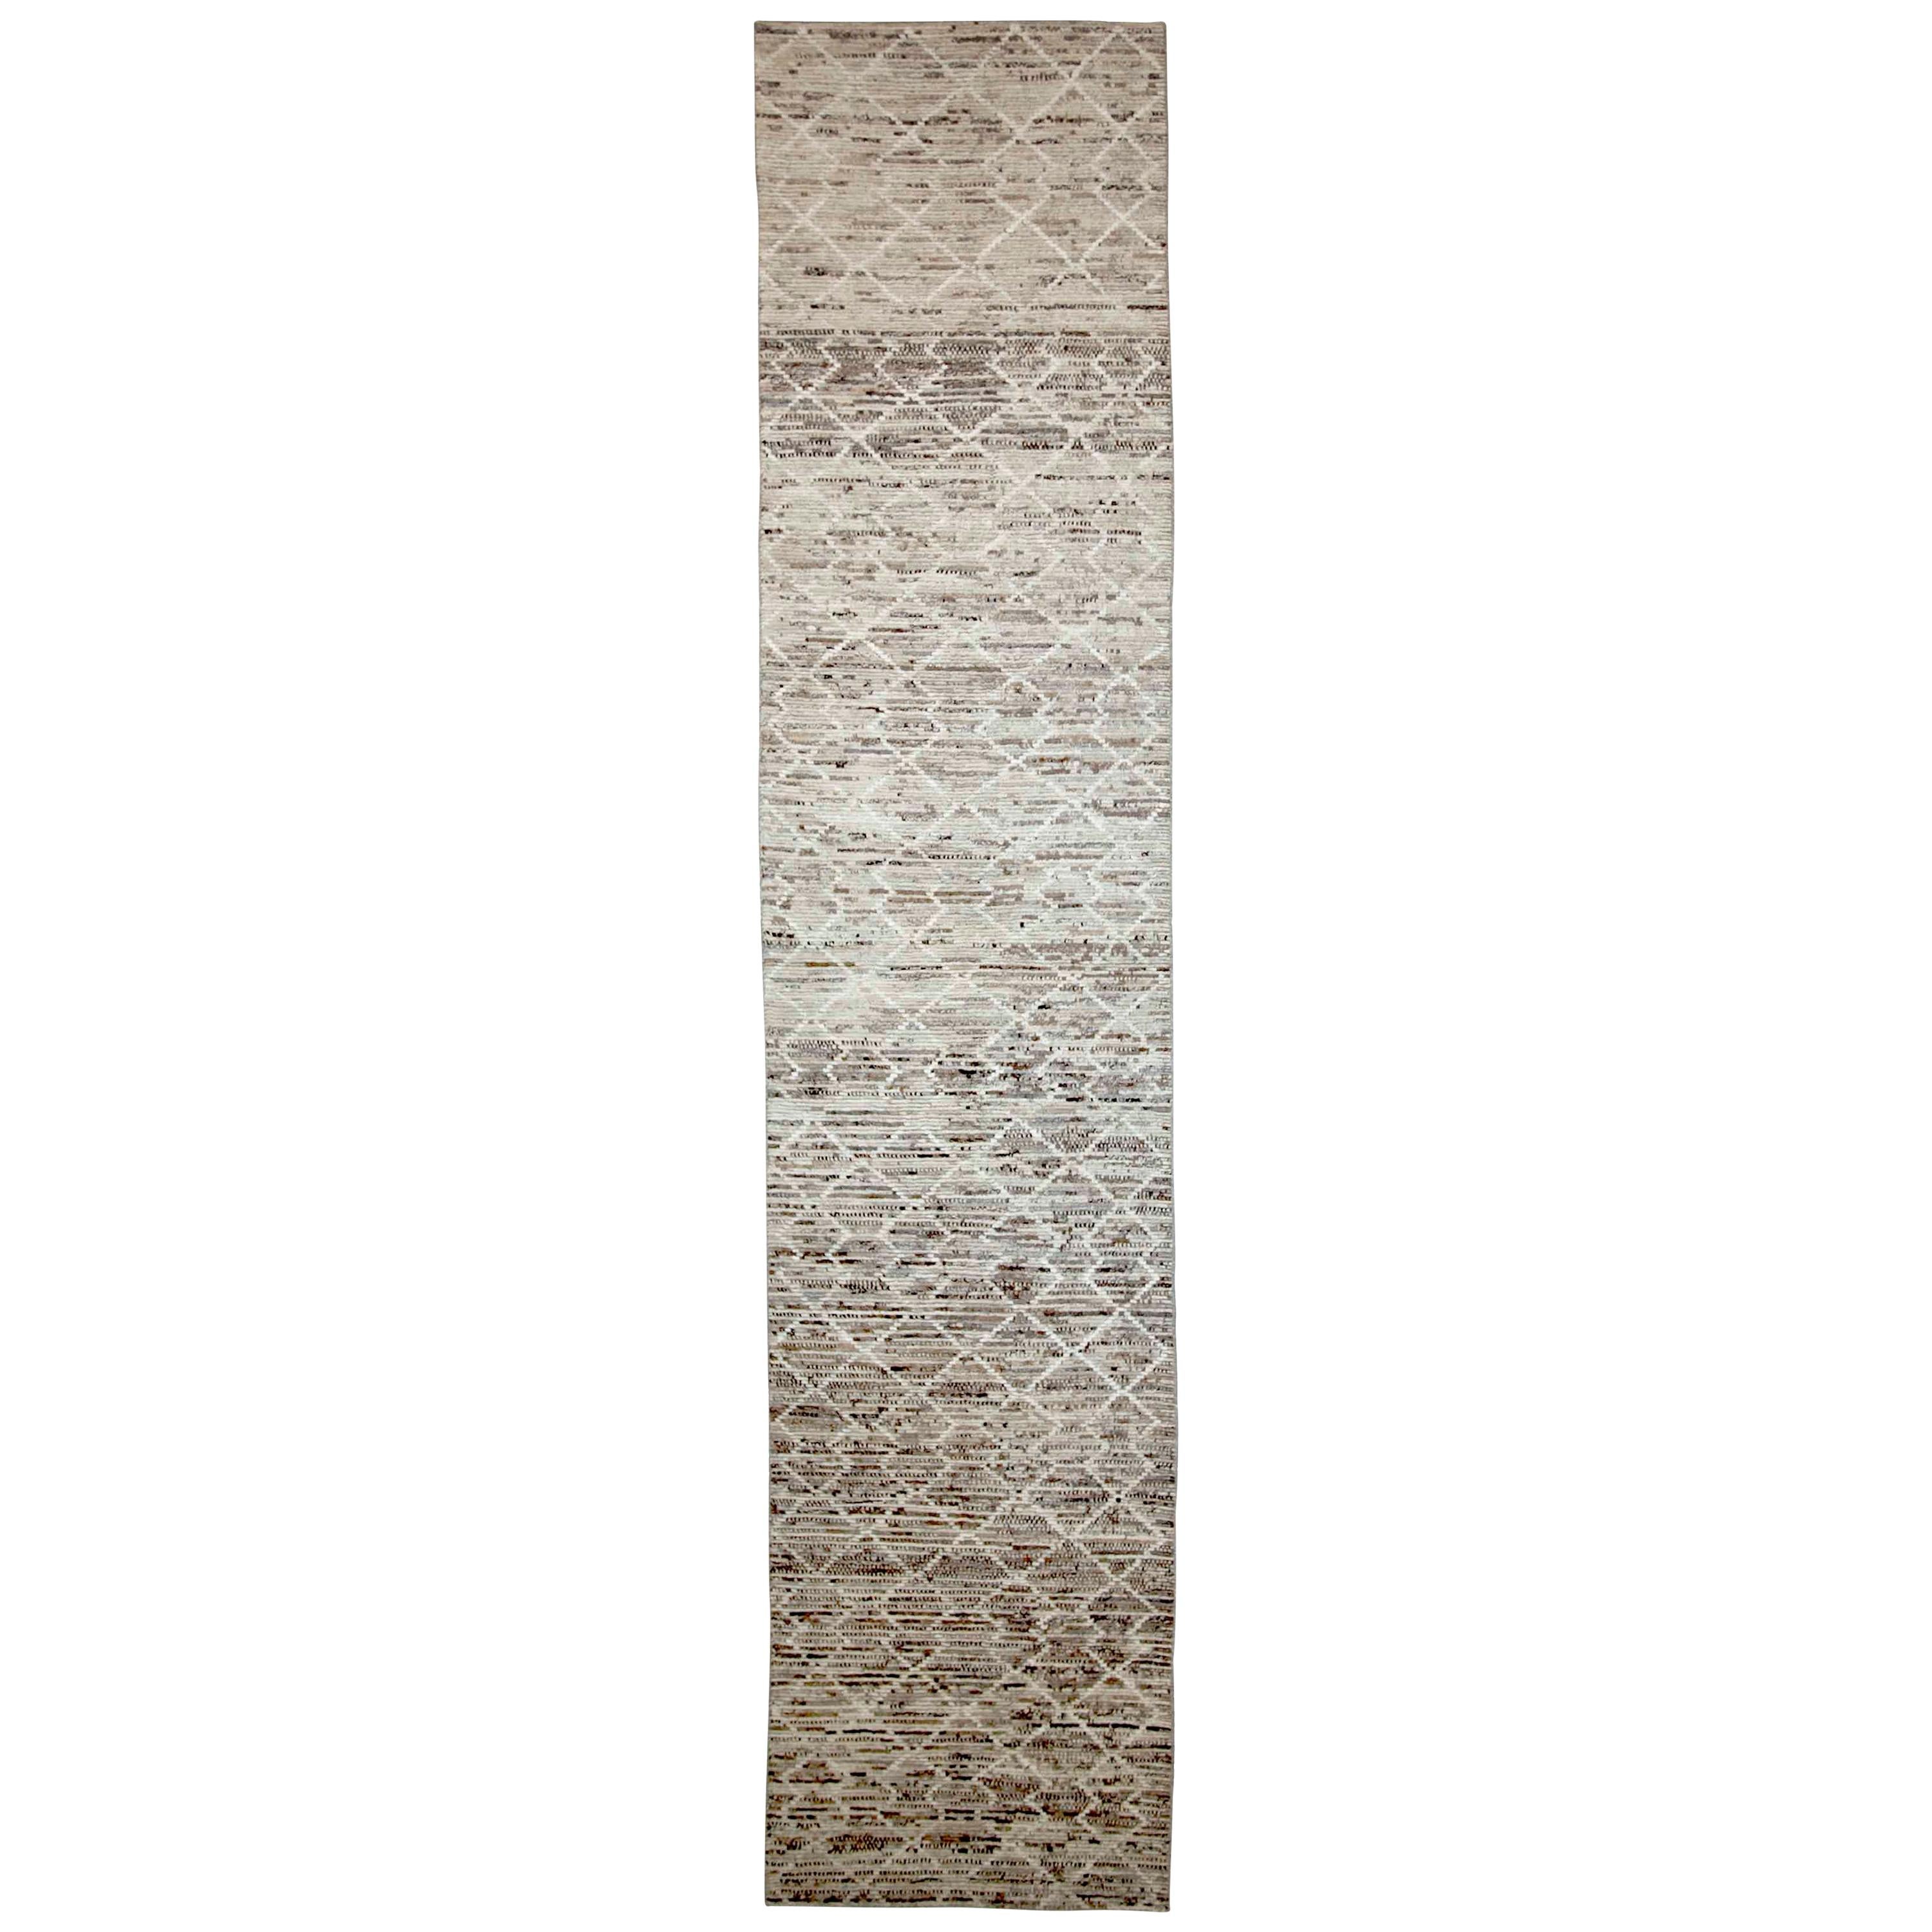 Afghan Runner Rug with White Moroccan Geometric Details on Ivory & Brown Field